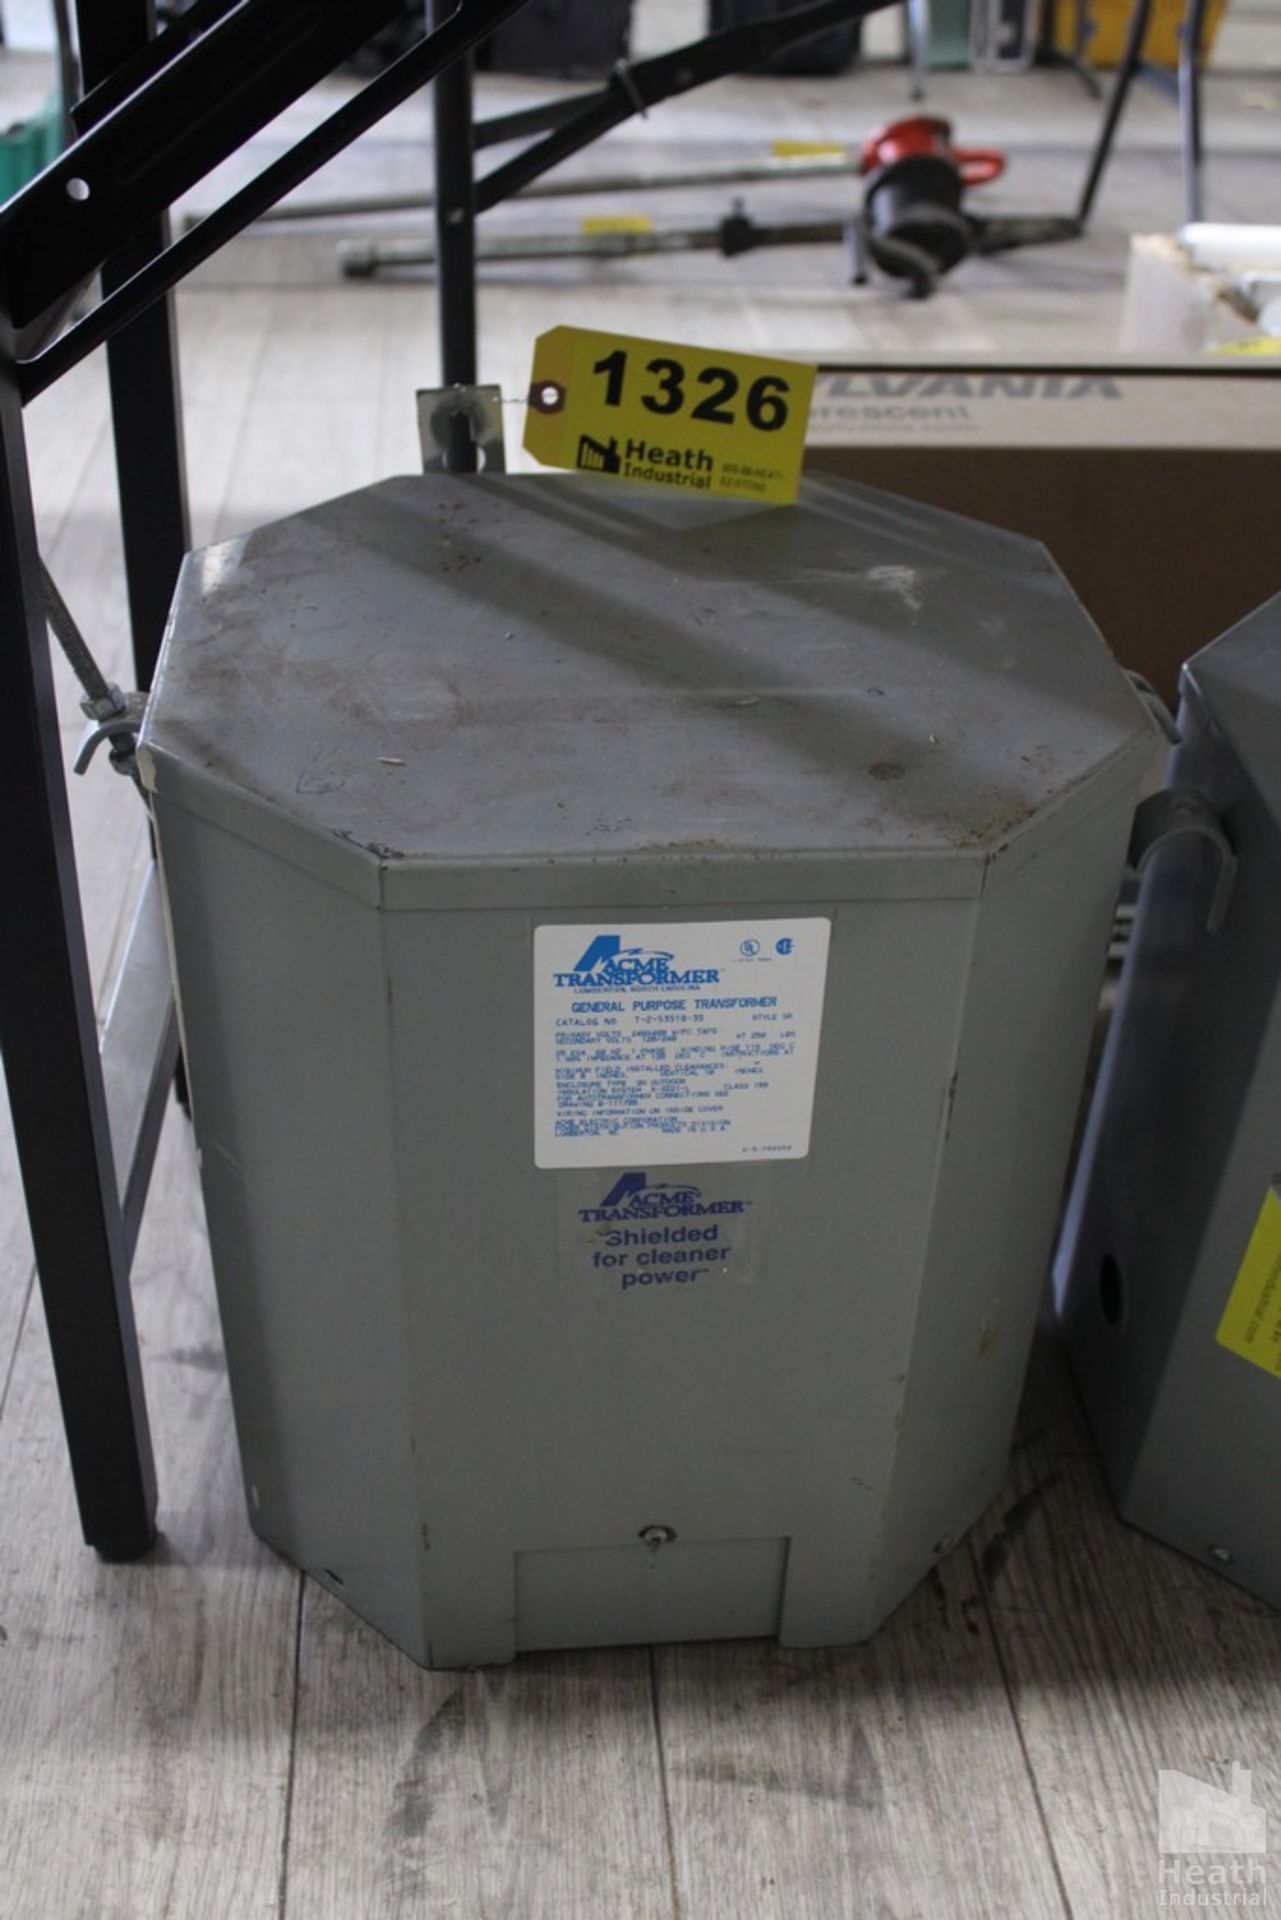 ACME GENERAL PURPOSE TRANSFORMER, CAT NO. T-2-53518-3S, STYLE-SR, PRIMARY VOLTS 240X48, SECONDARY